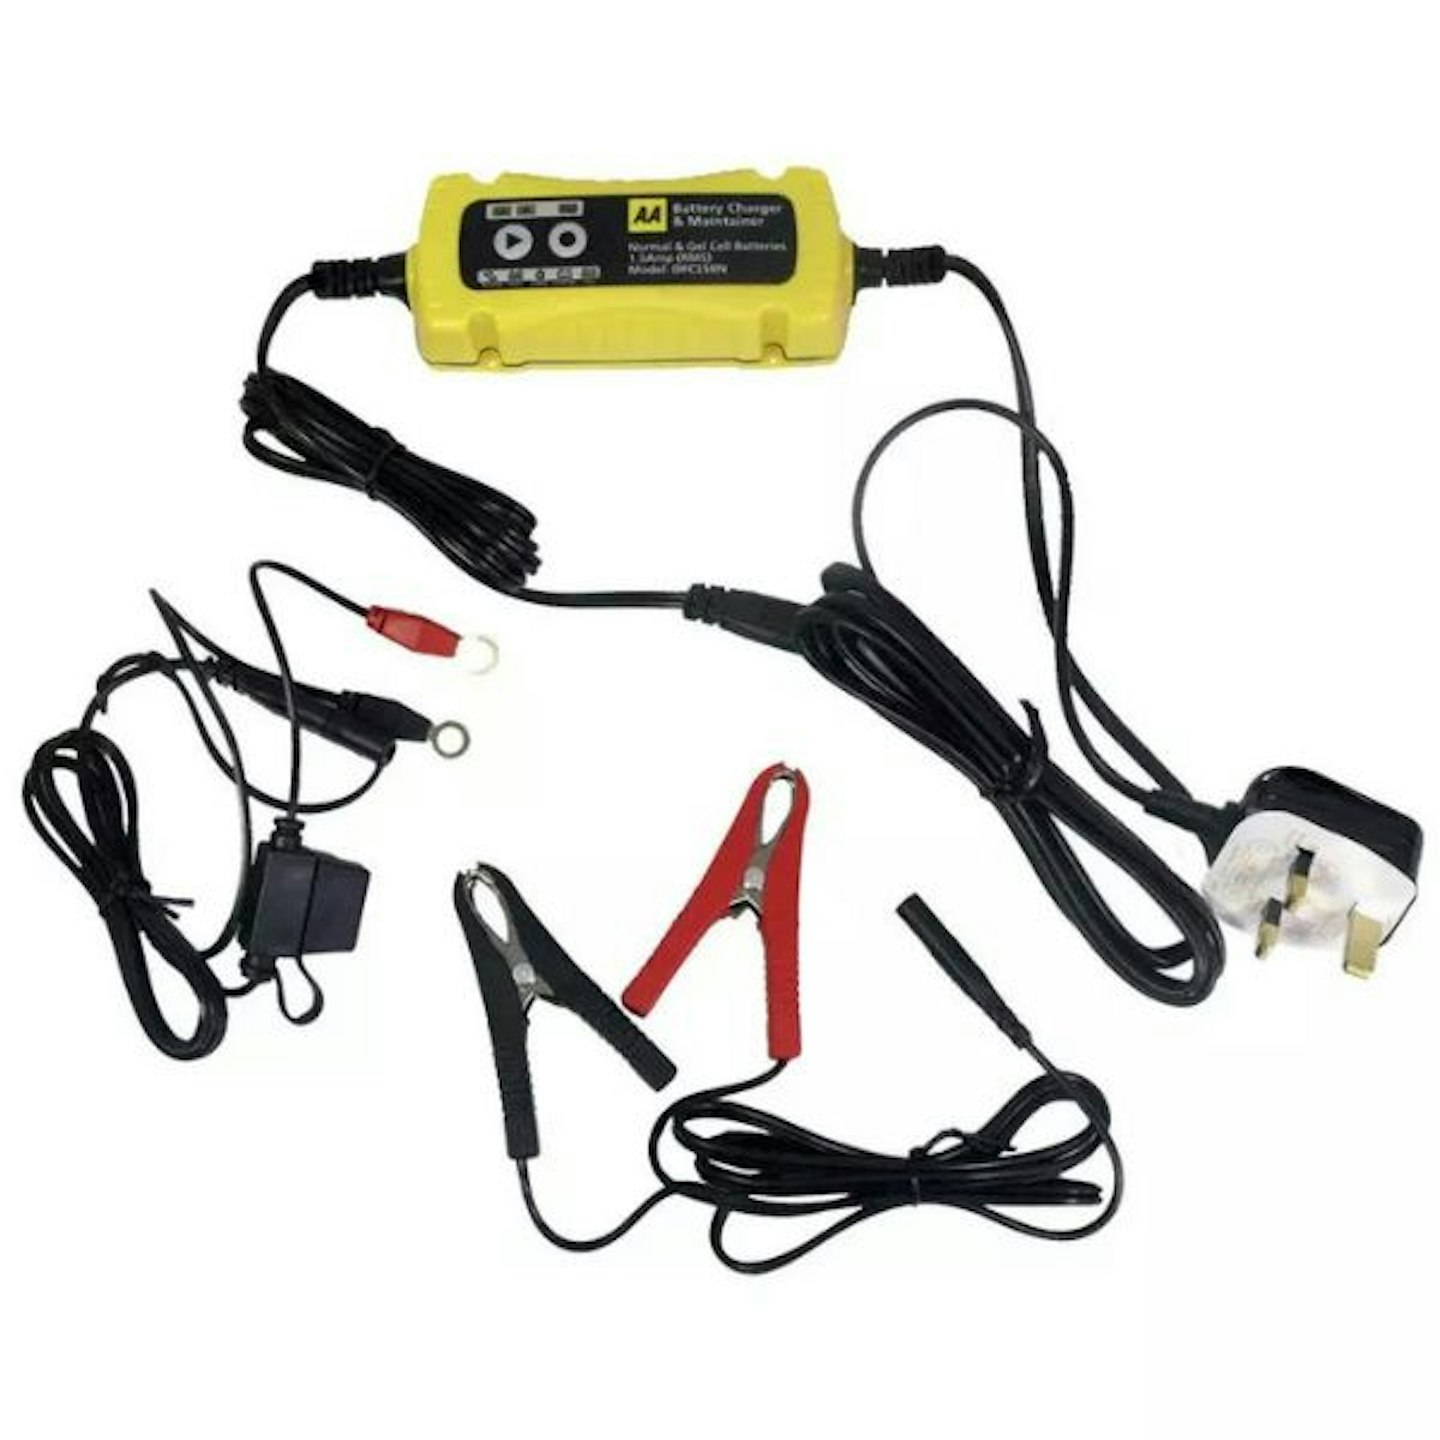 The AA 6V12V Smart Trickle Car Battery Charger